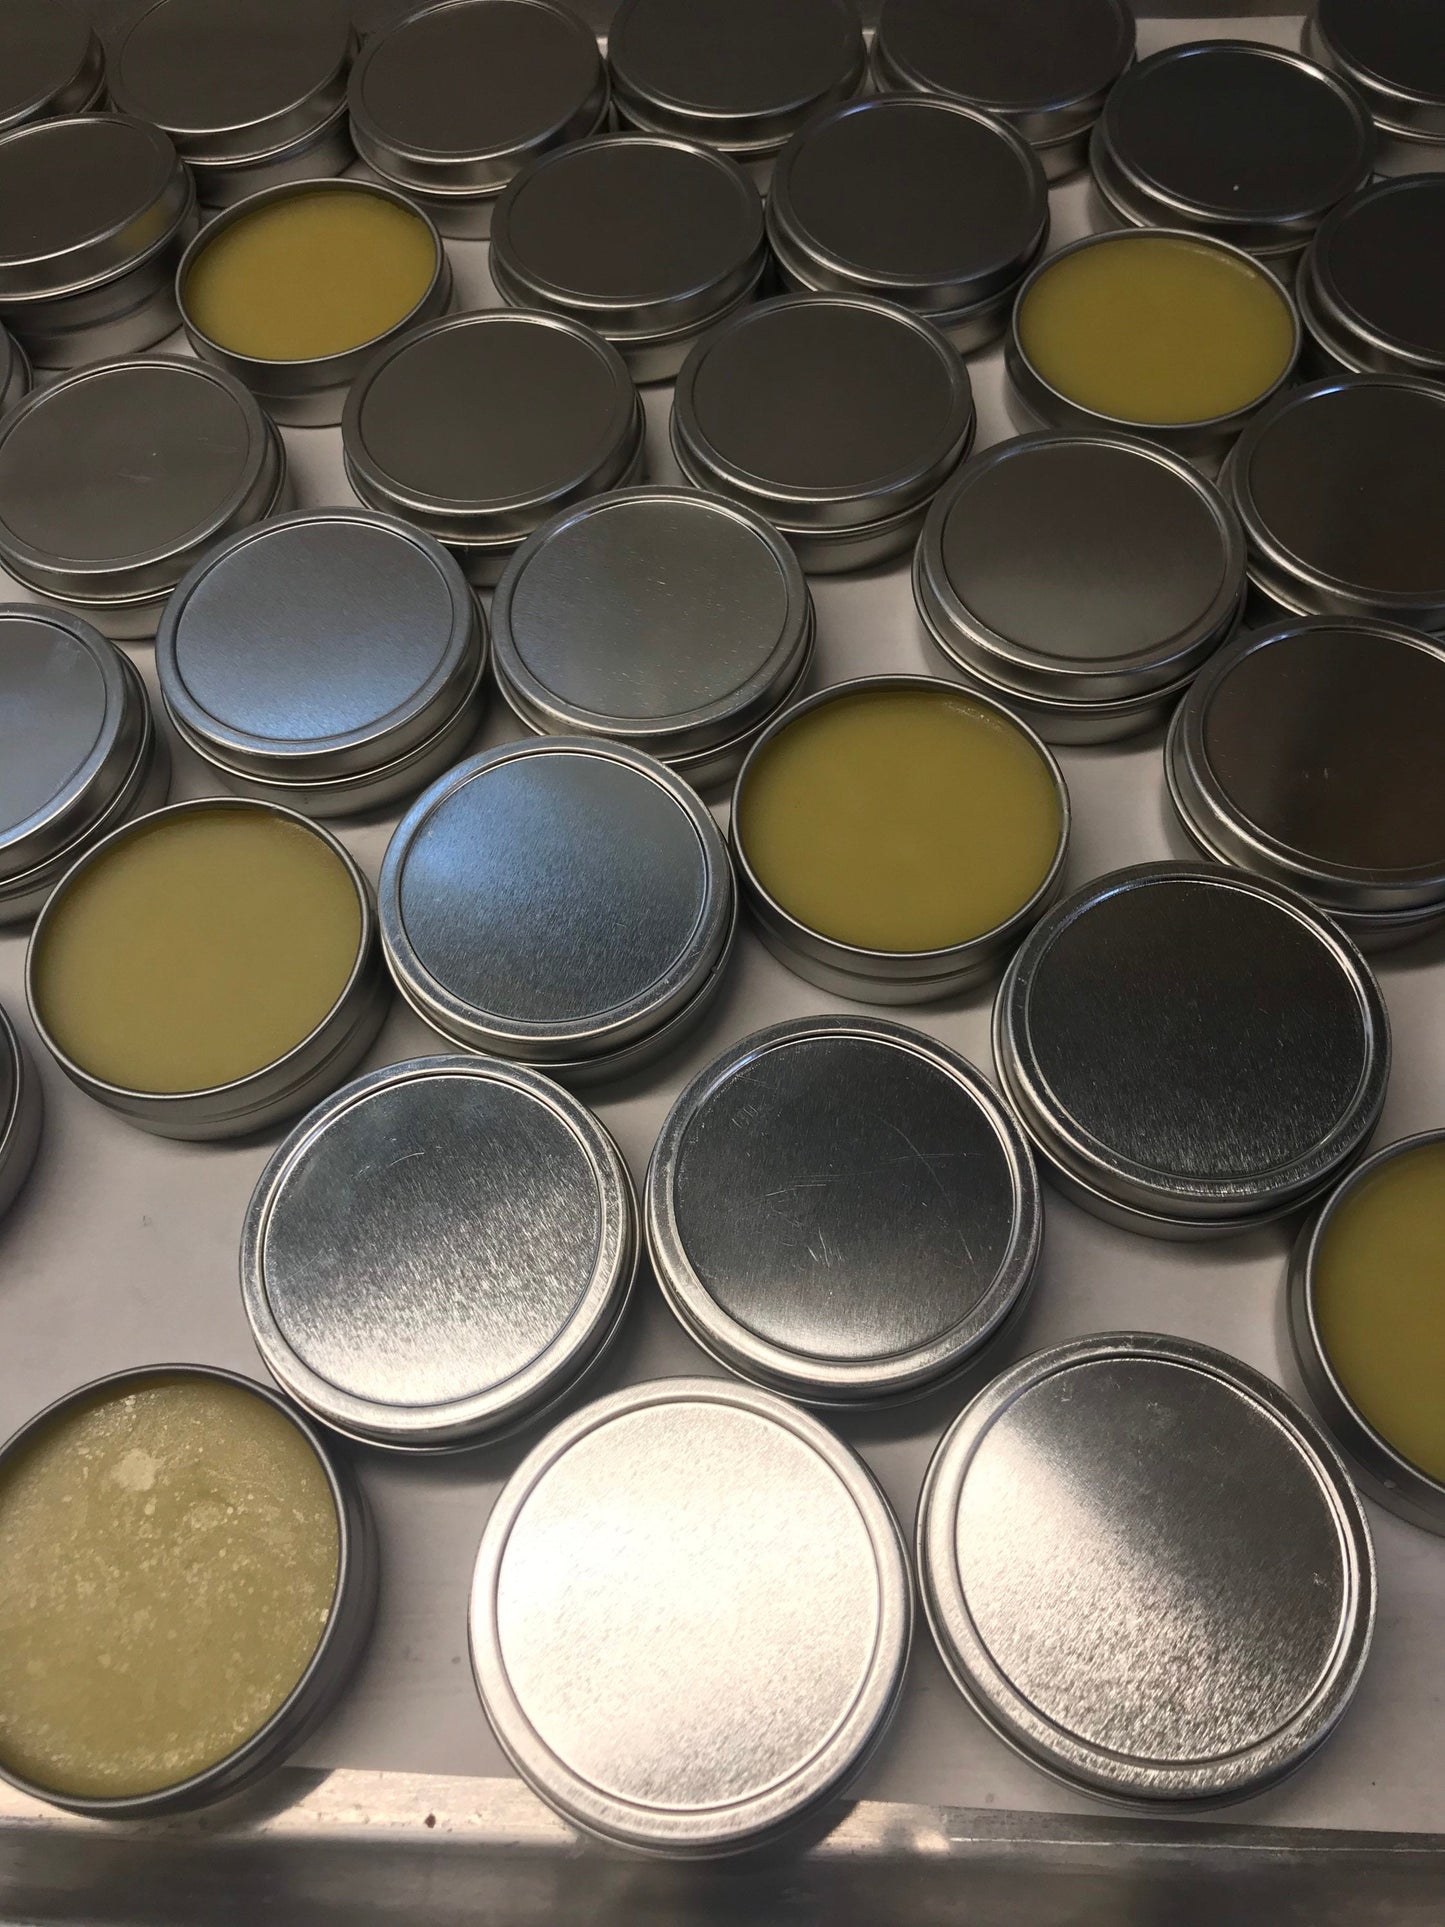 A photo showing a container of Cut and Abrasion Salve